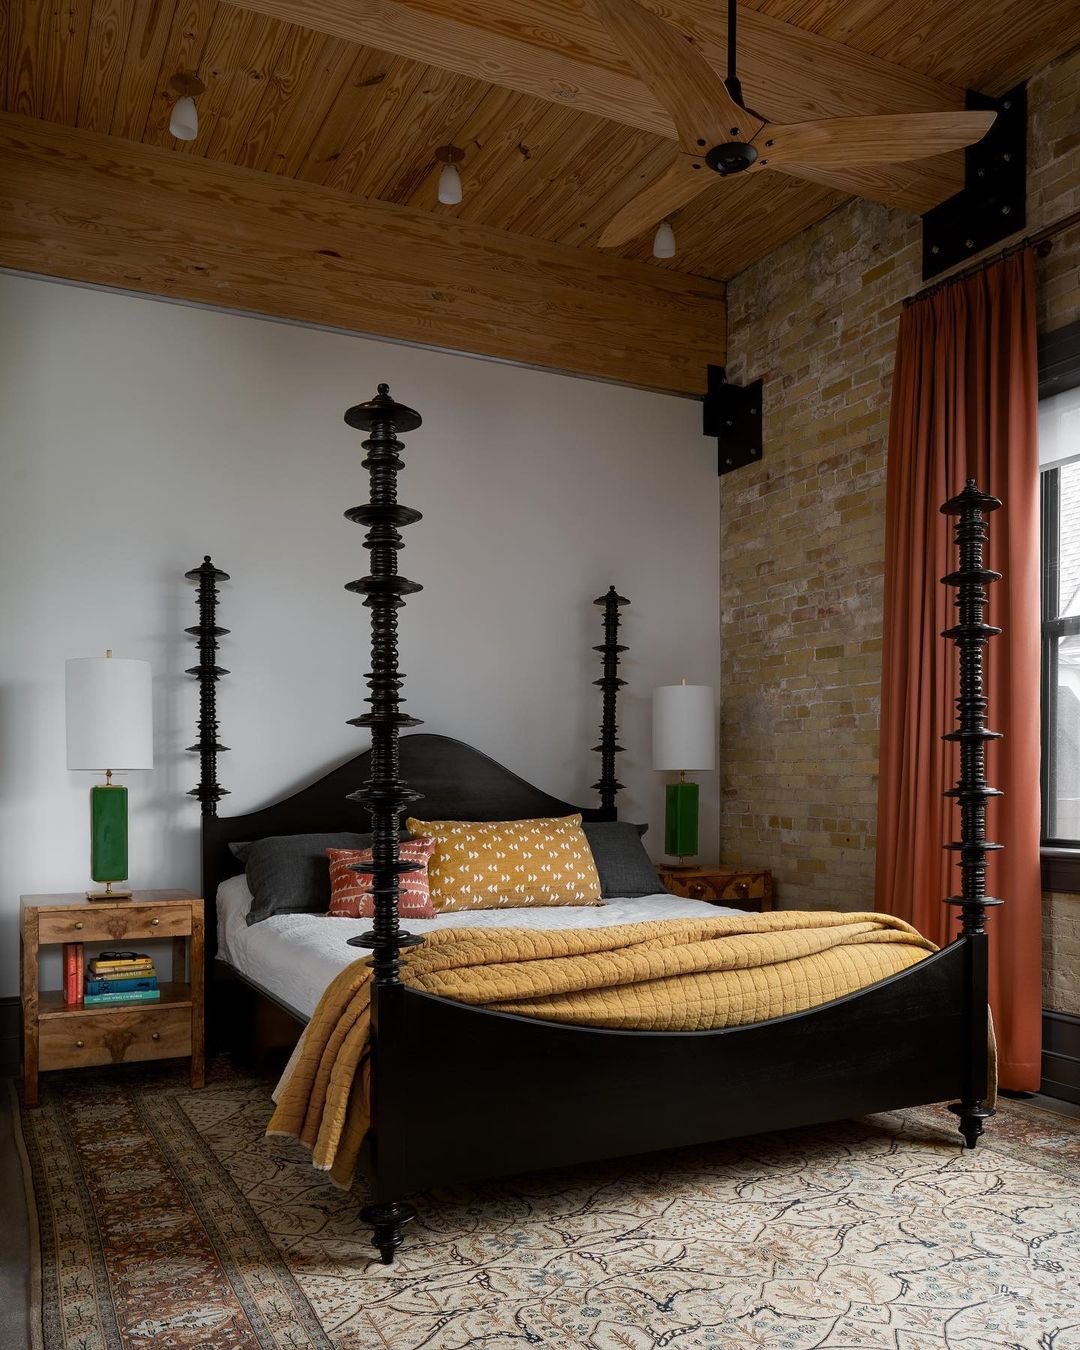 Rustic Four Poster Bed with Industrial Elements